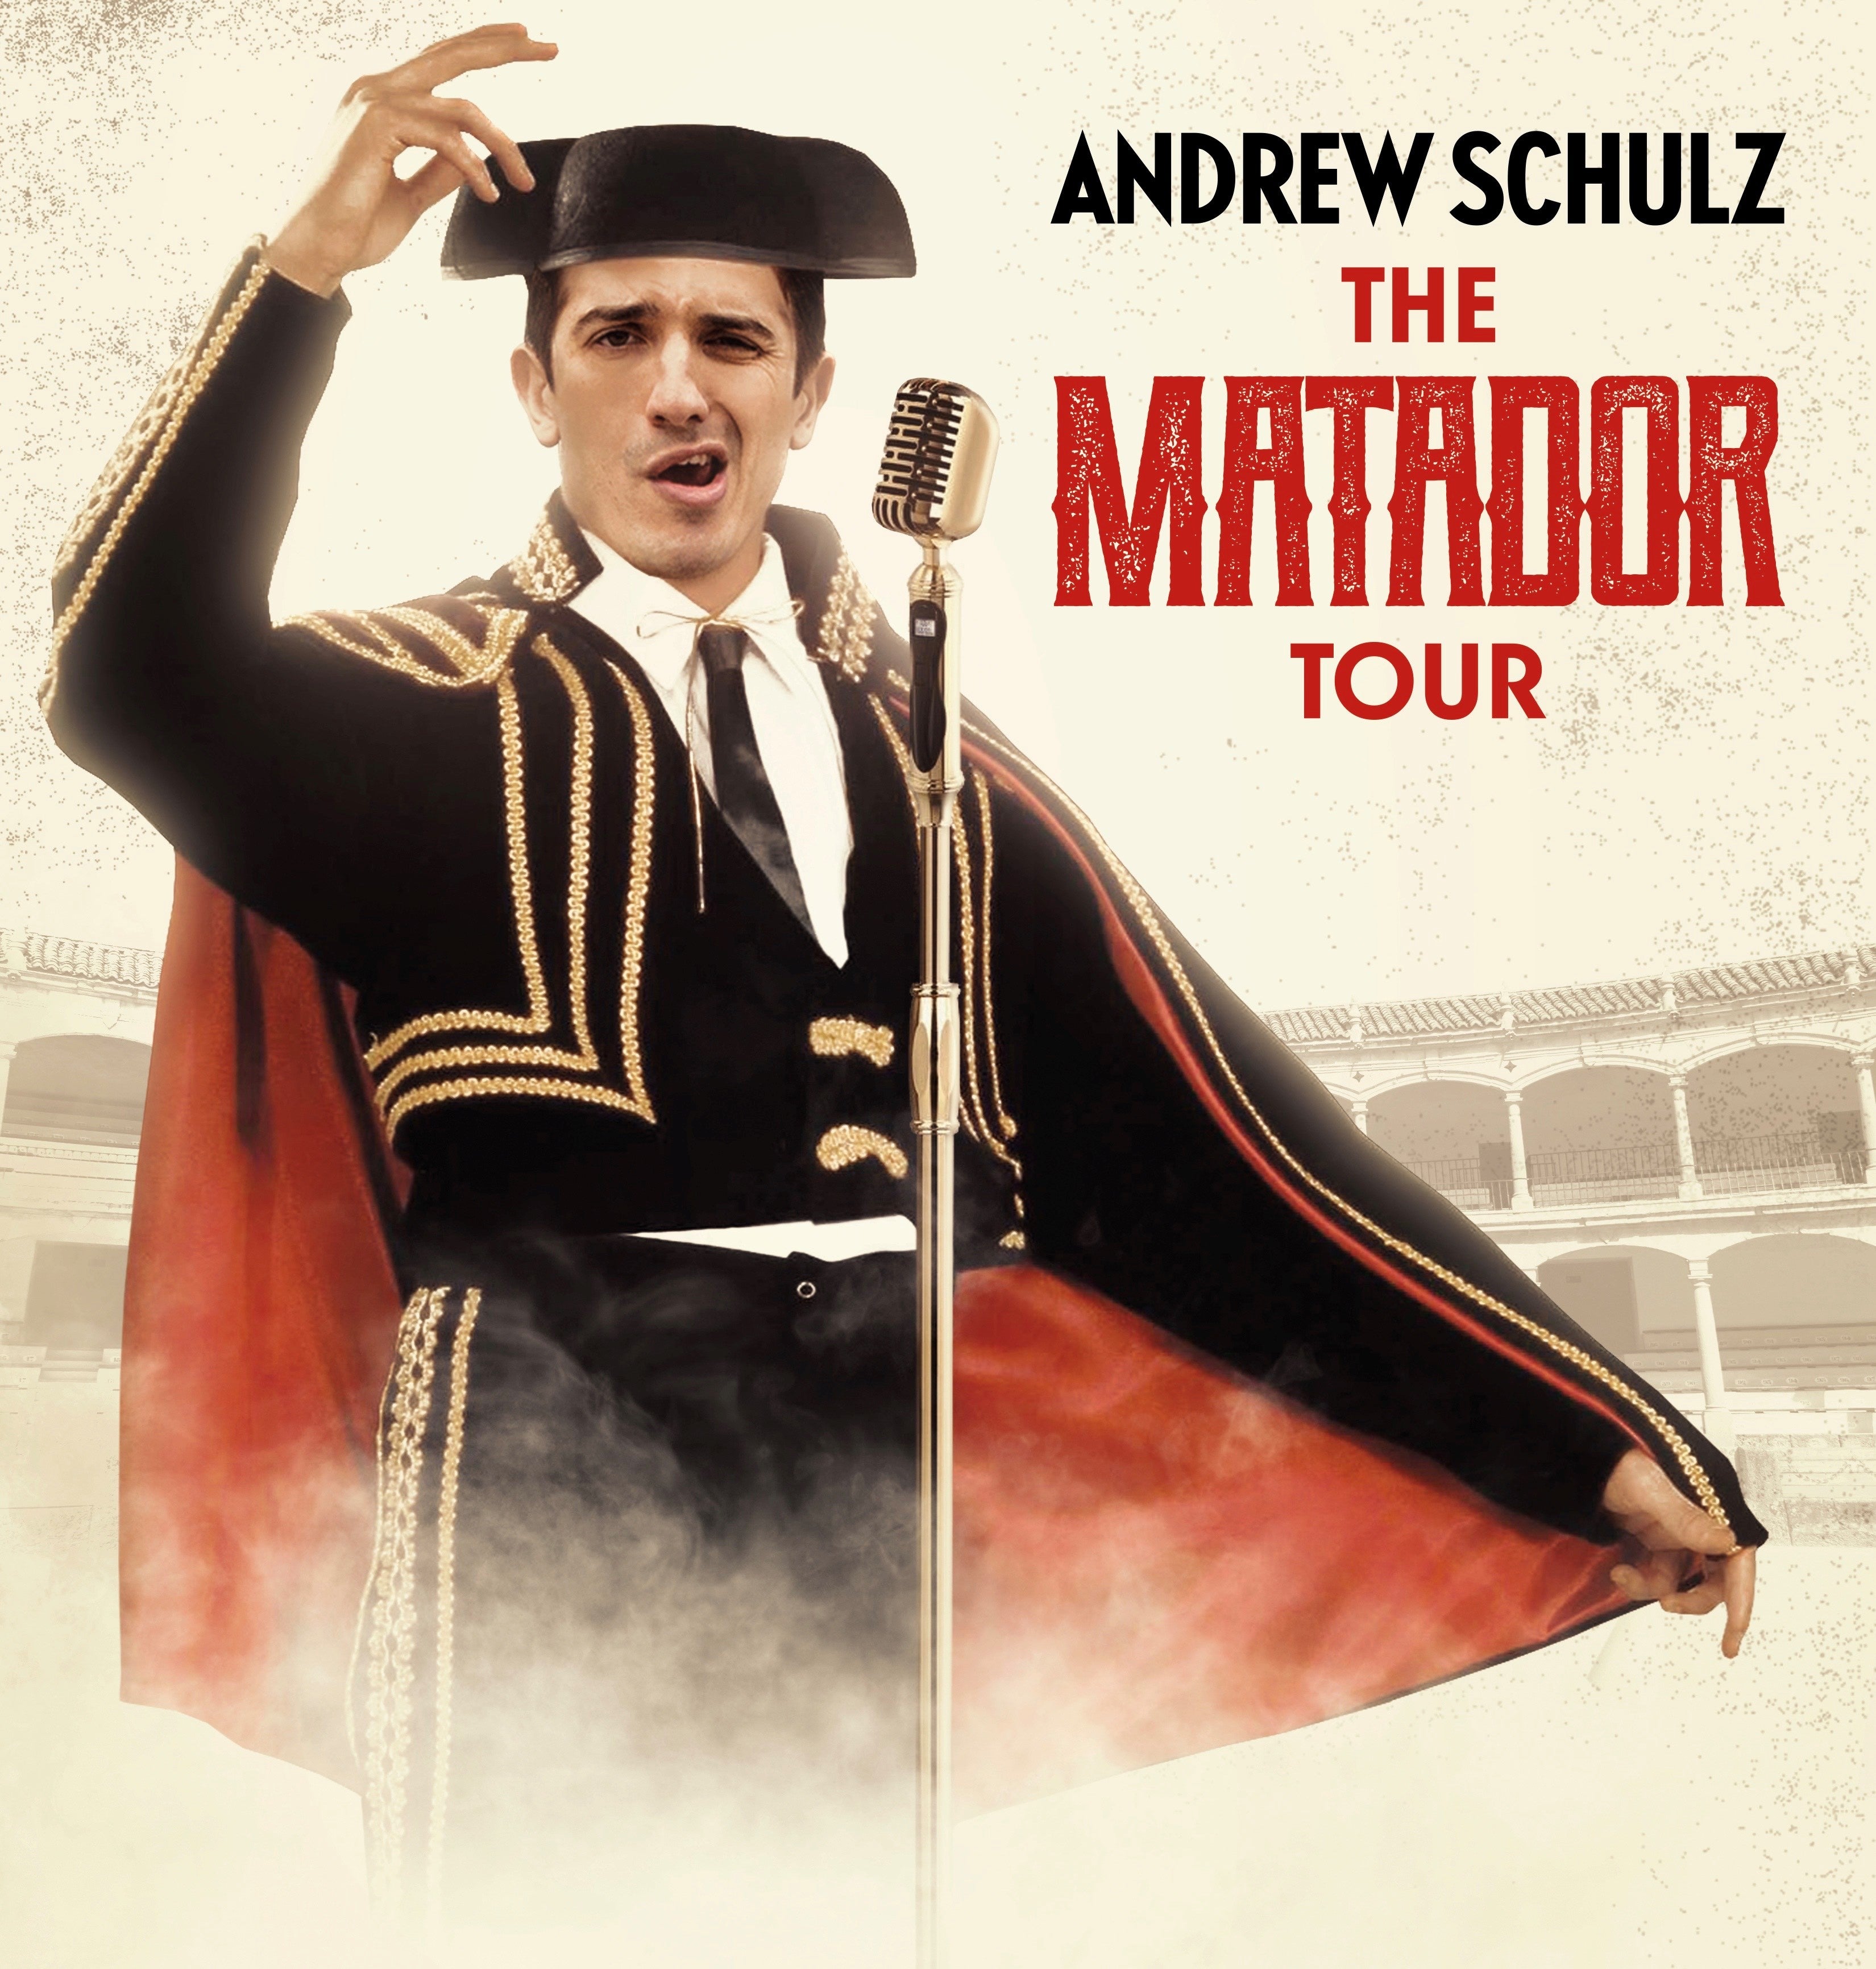 Andrew Schulz: The Life Tour at Belk Theater